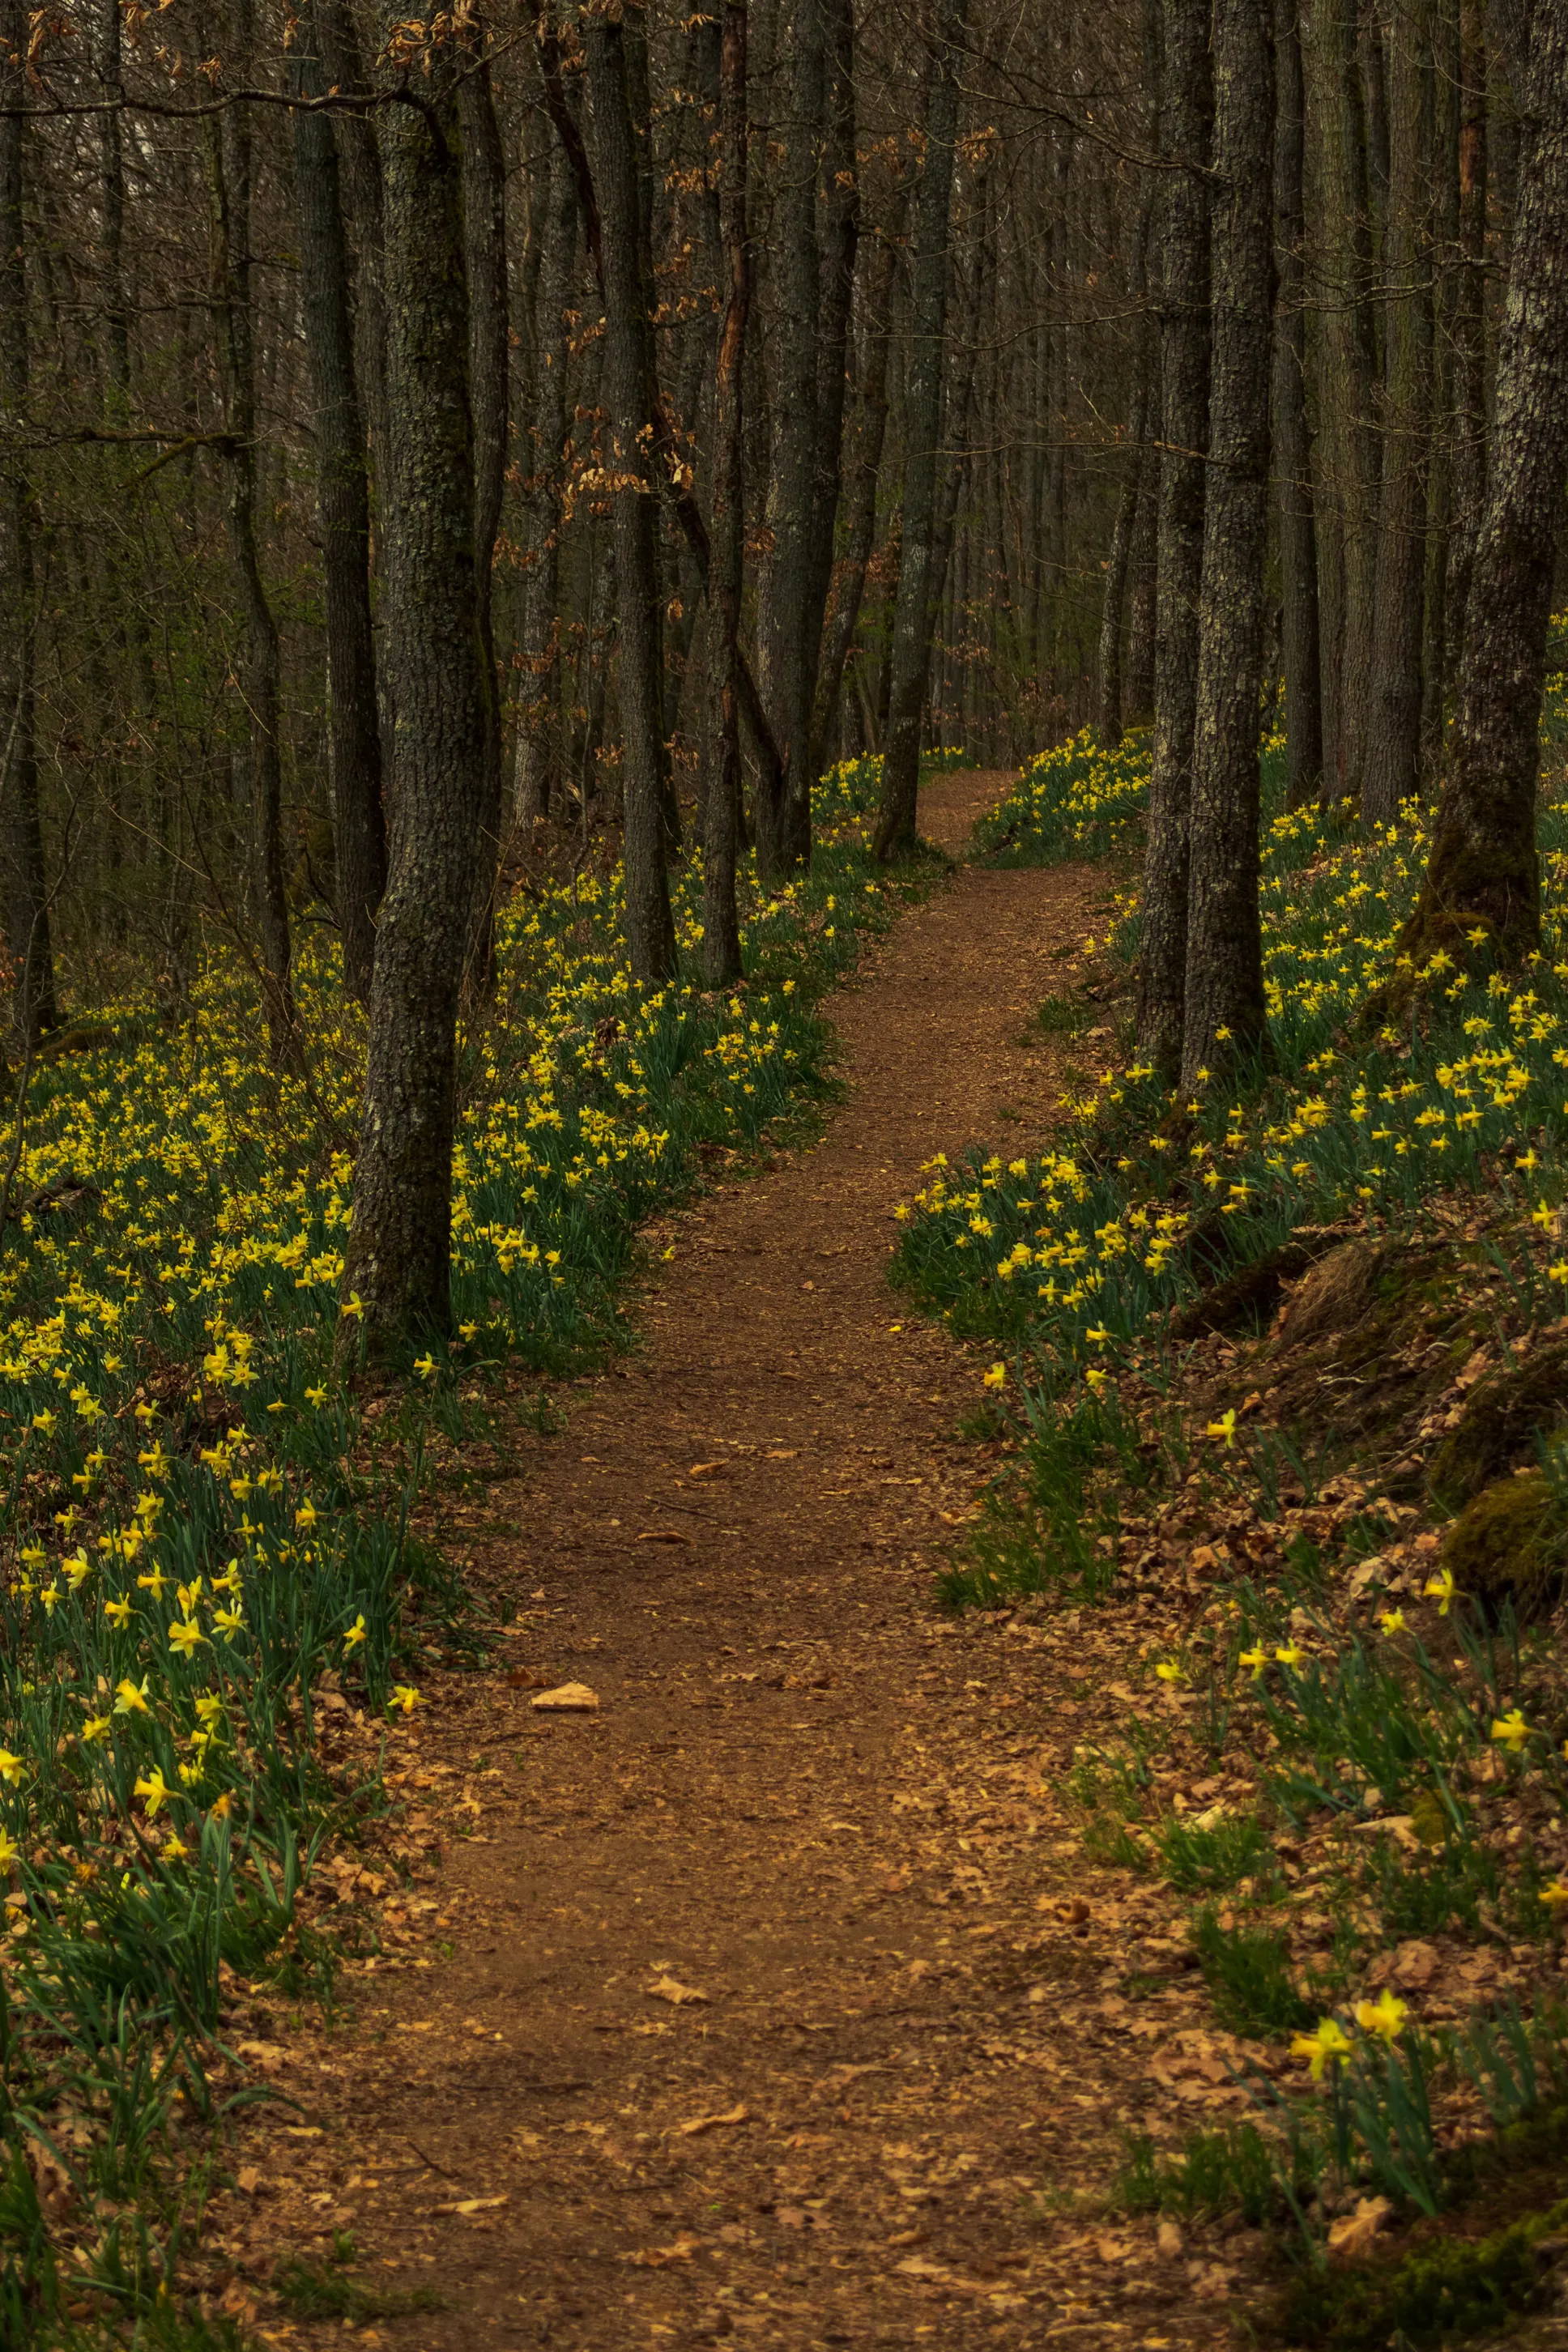 A path through a forest lined with daffodils